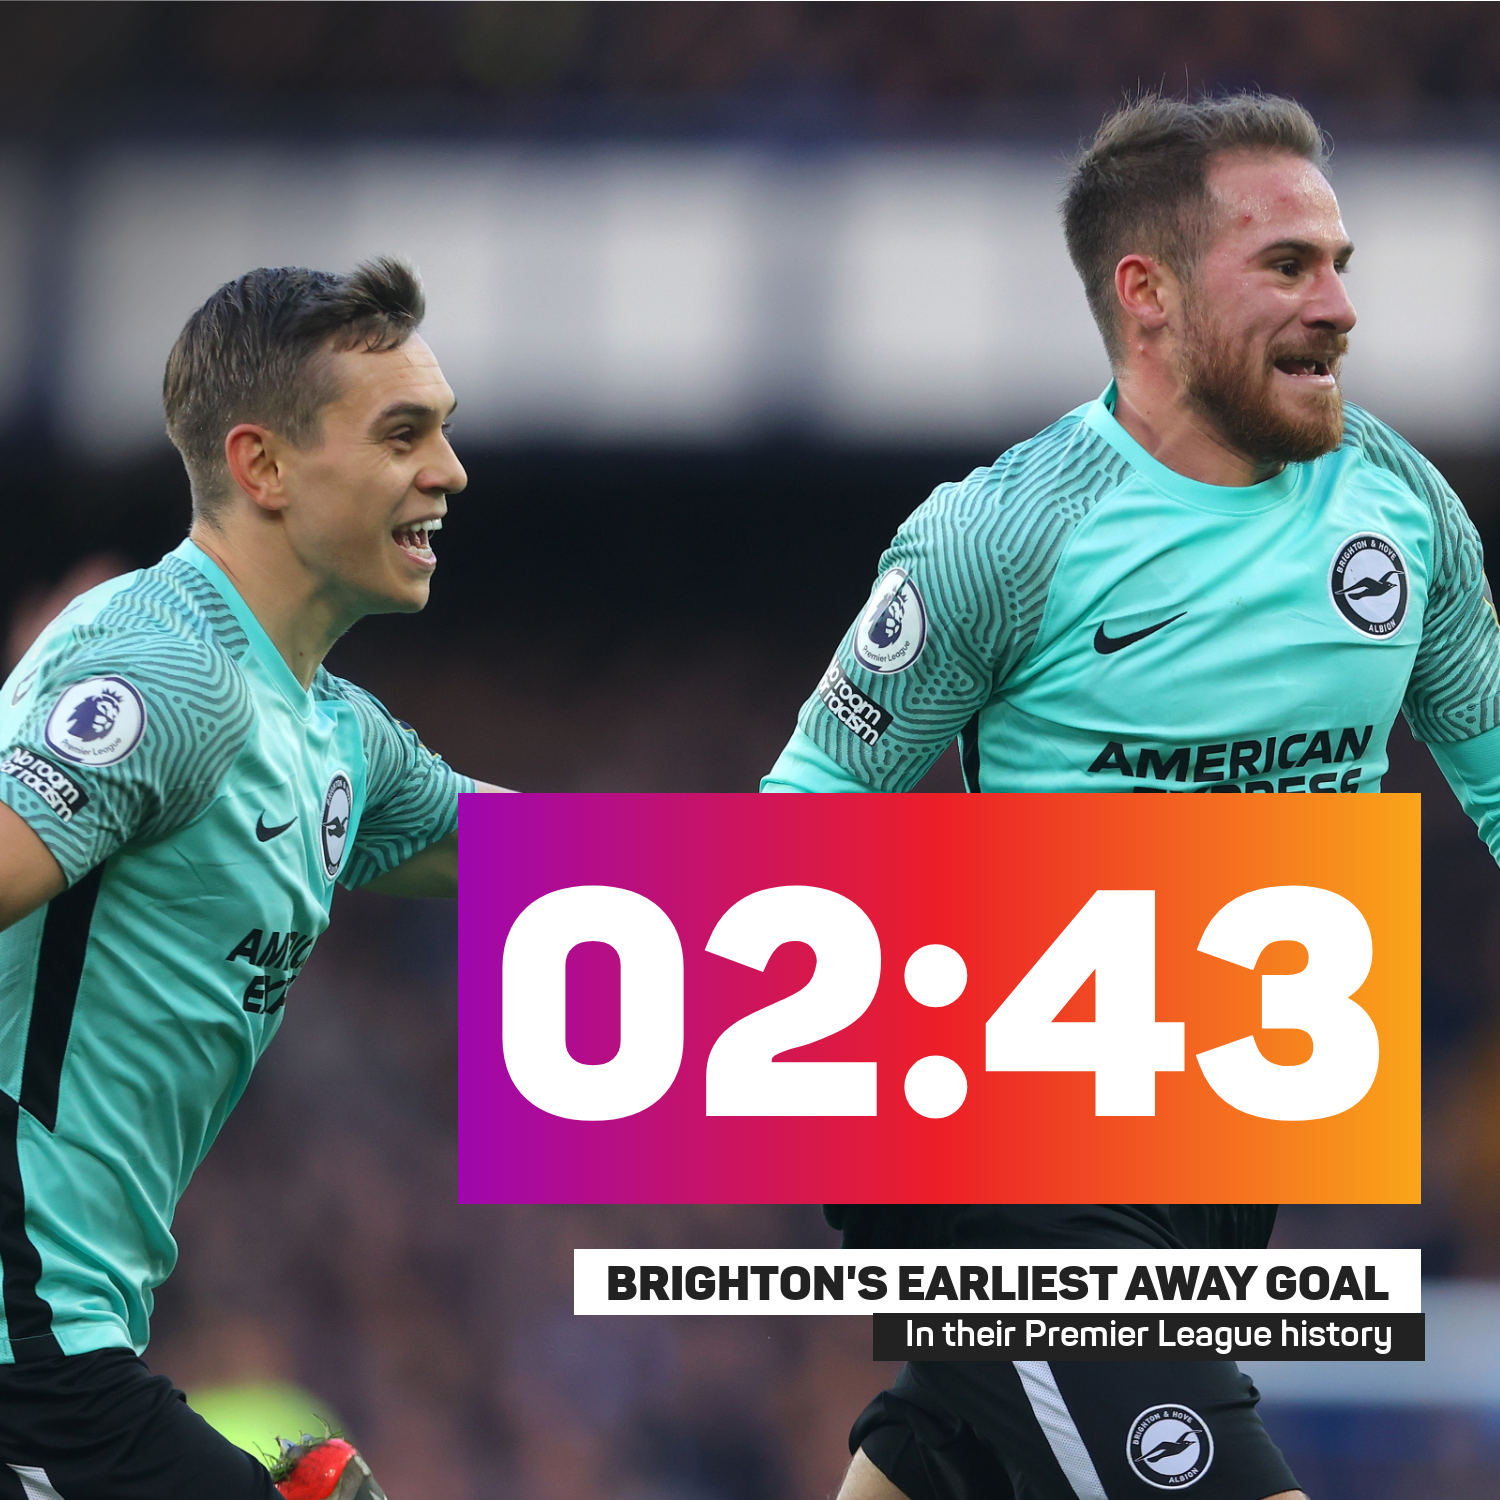 Brighton scored early on against Everton